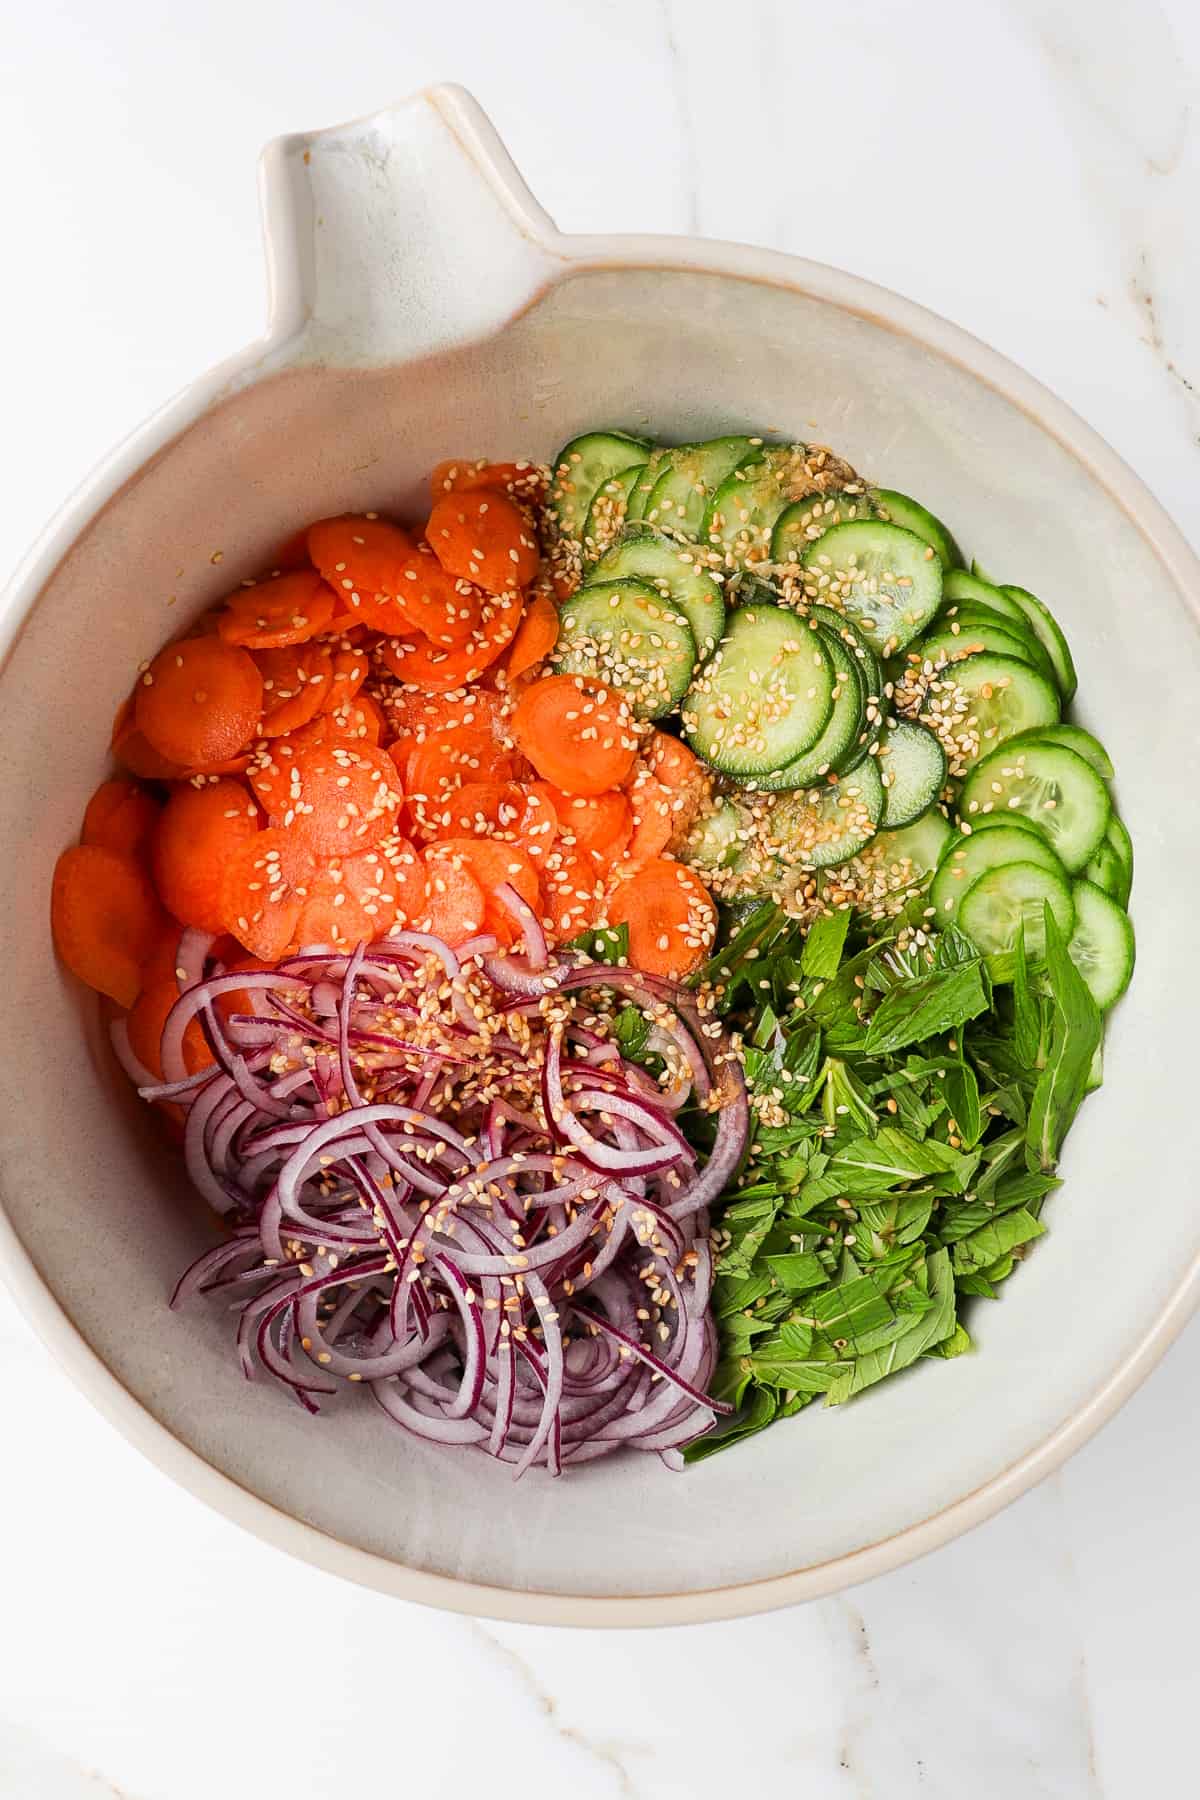 Cucumbers, carrots, red onions, mint and toasted sesame seeds in a bowl.